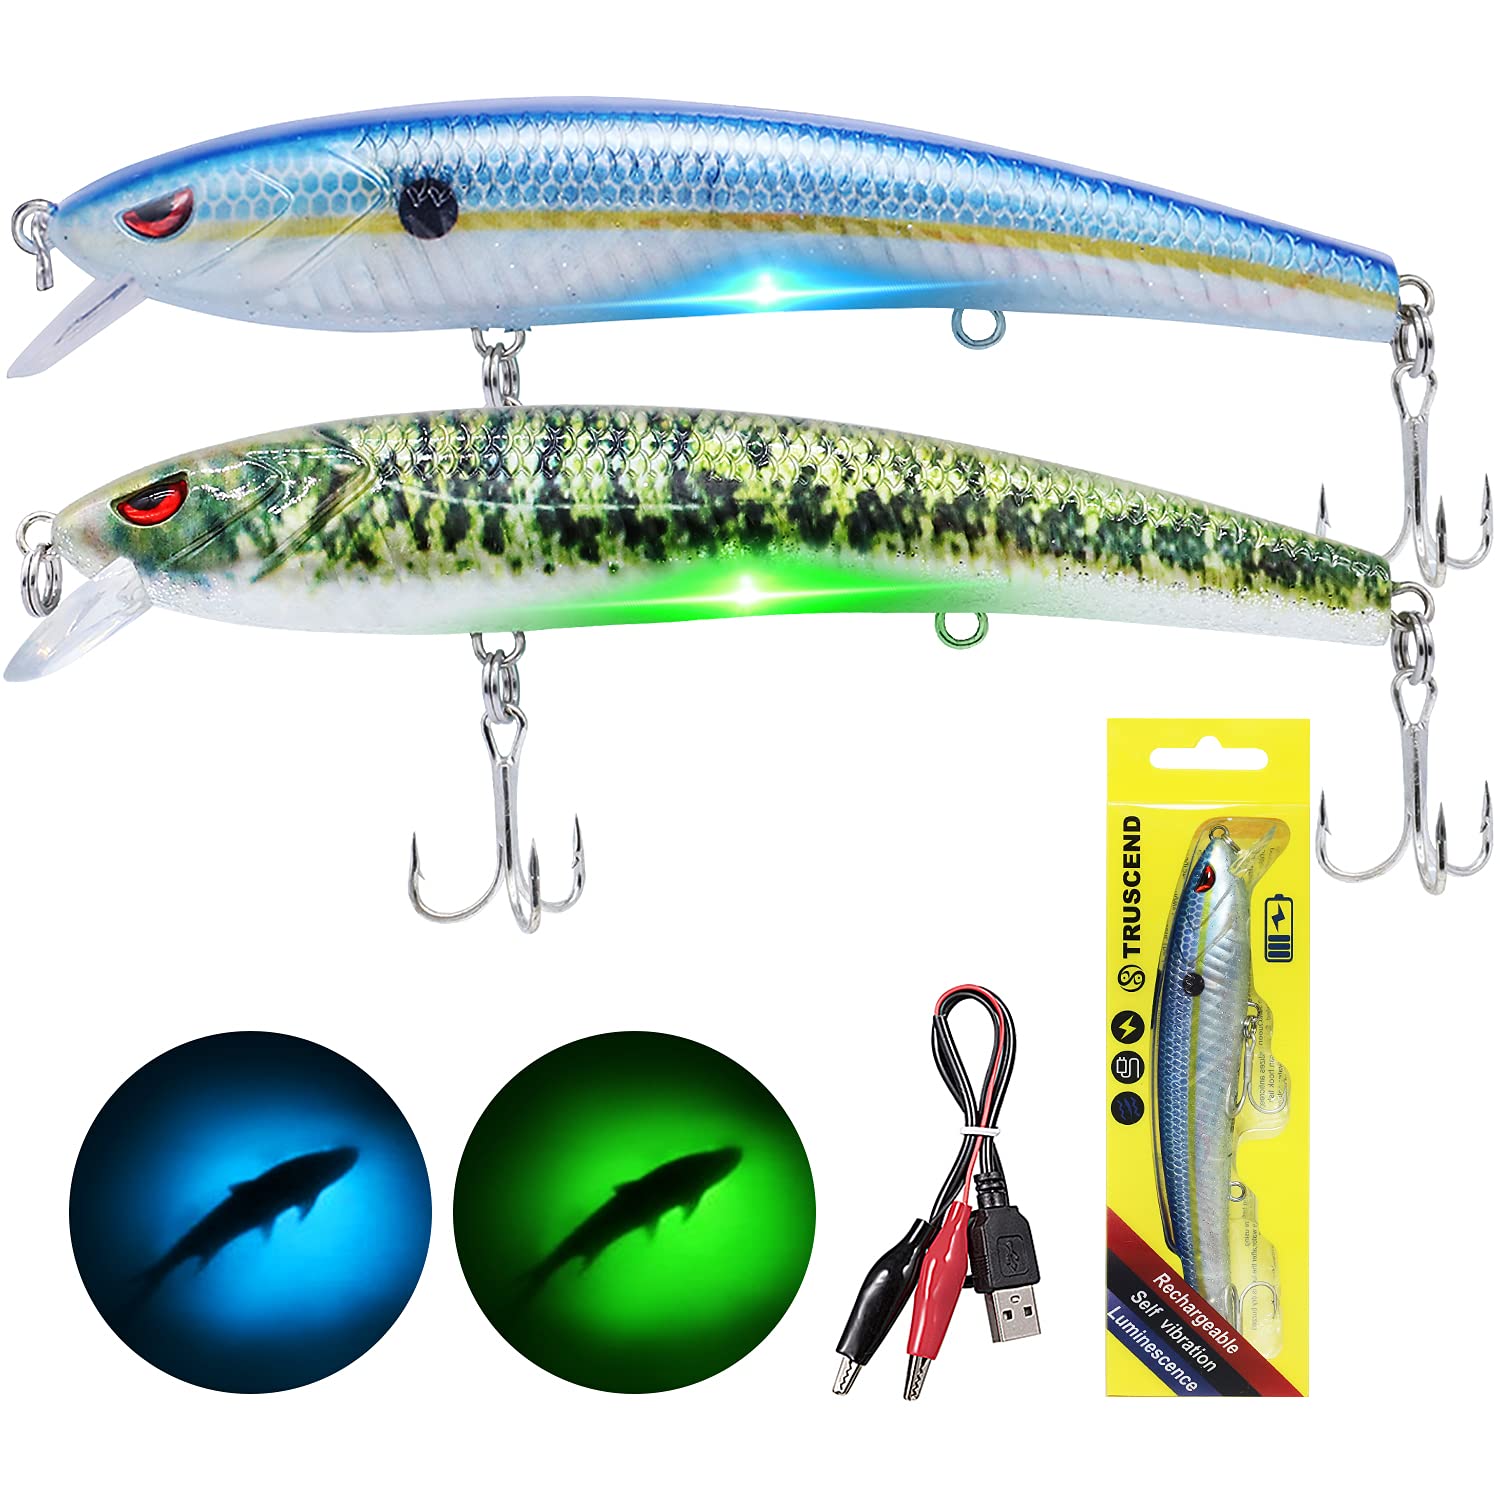 Fishing Lures Bass Lures Artificial Bait USB Rechargeable LED Vibrate  Sinking Lure for Bass Trout Pike Perch